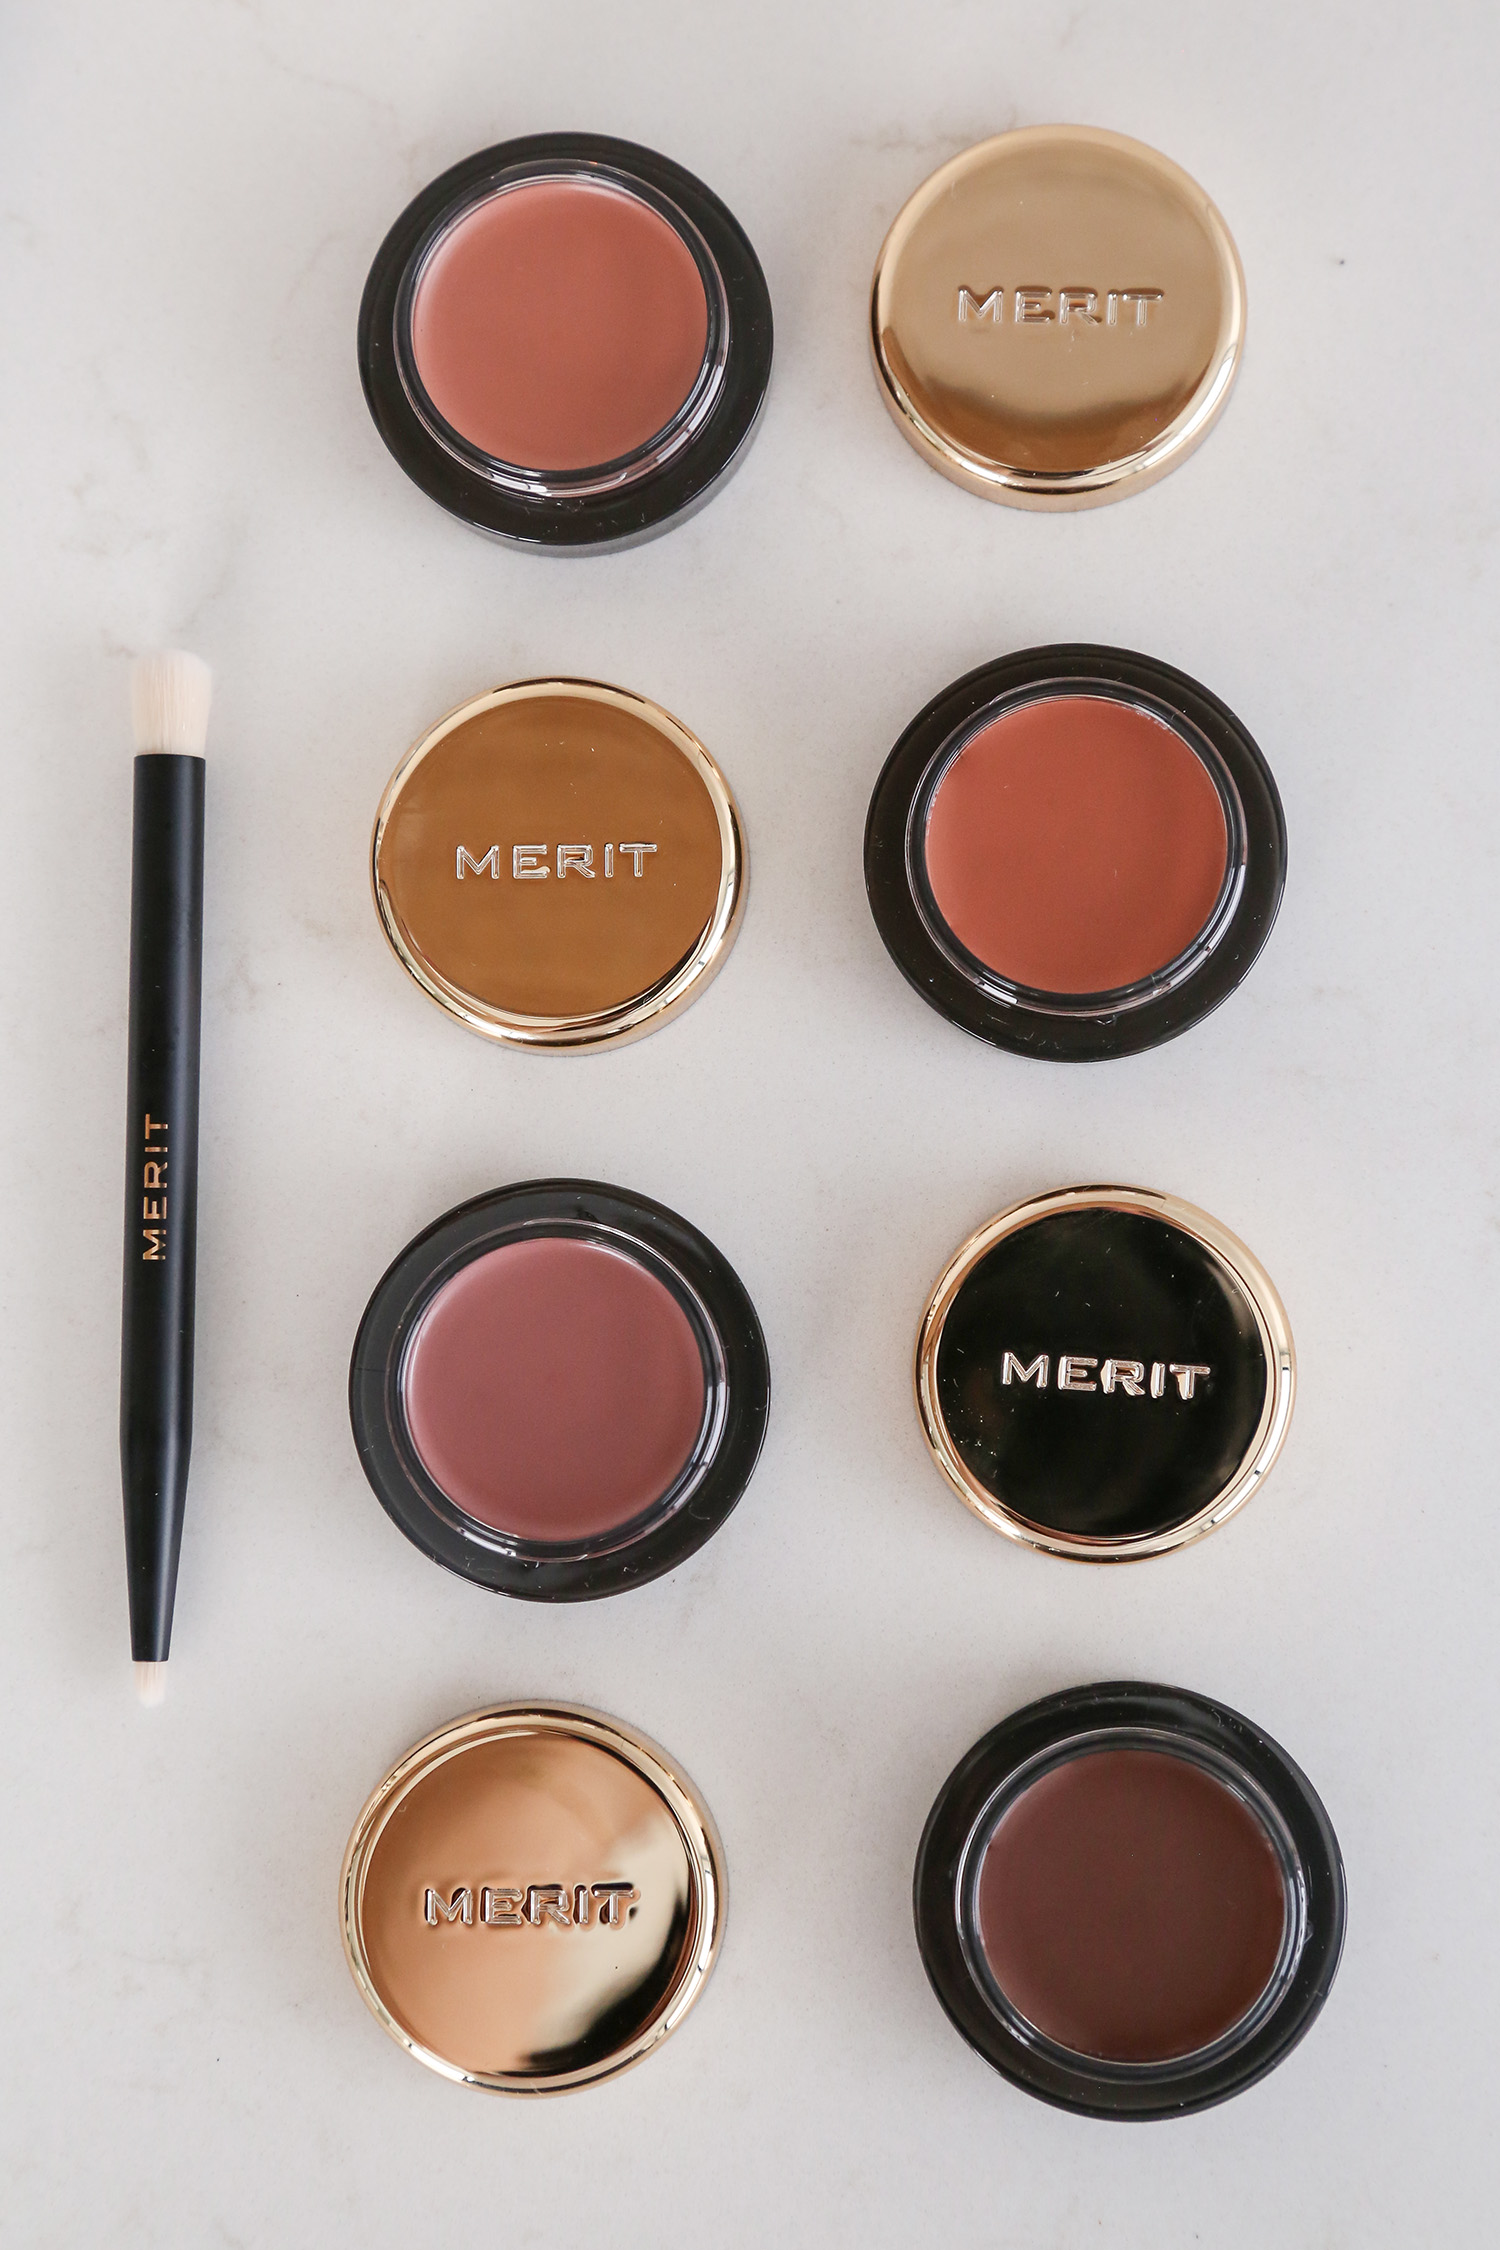 MERIT Beauty Solo Shadow Review